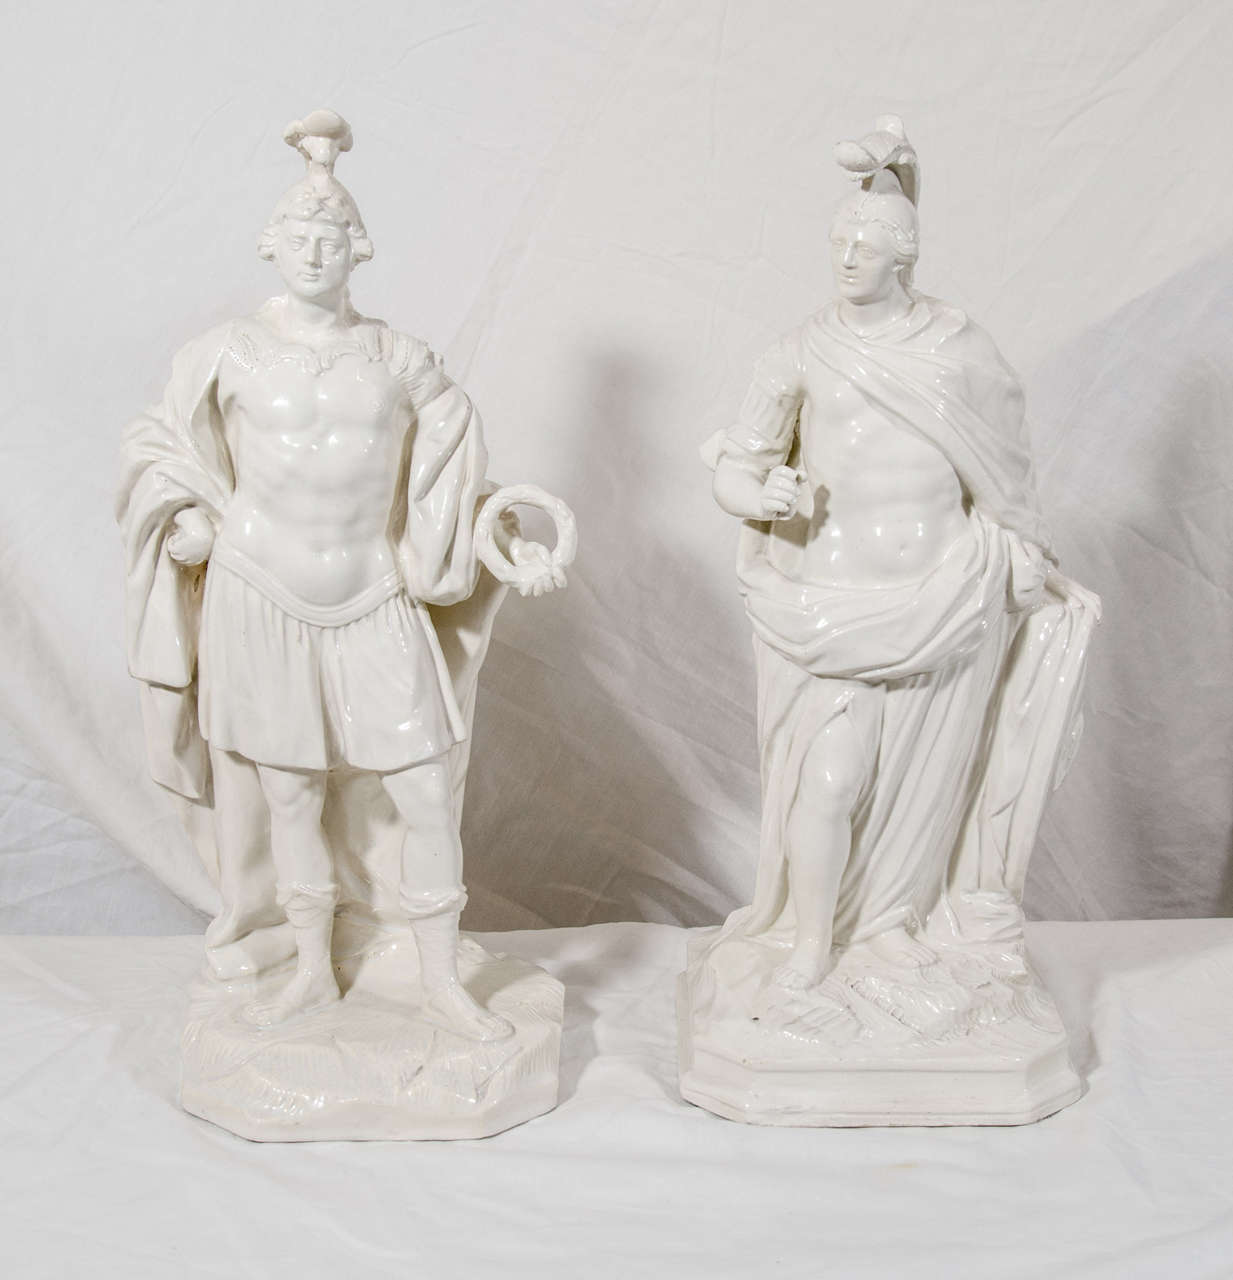 A pair of rare Creamware figures of Roman officers. Each shown standing at rest wearing elaborate headdress and robe indicating high rank. One figure holds a victory wreath, the other rests leaning on his shield.